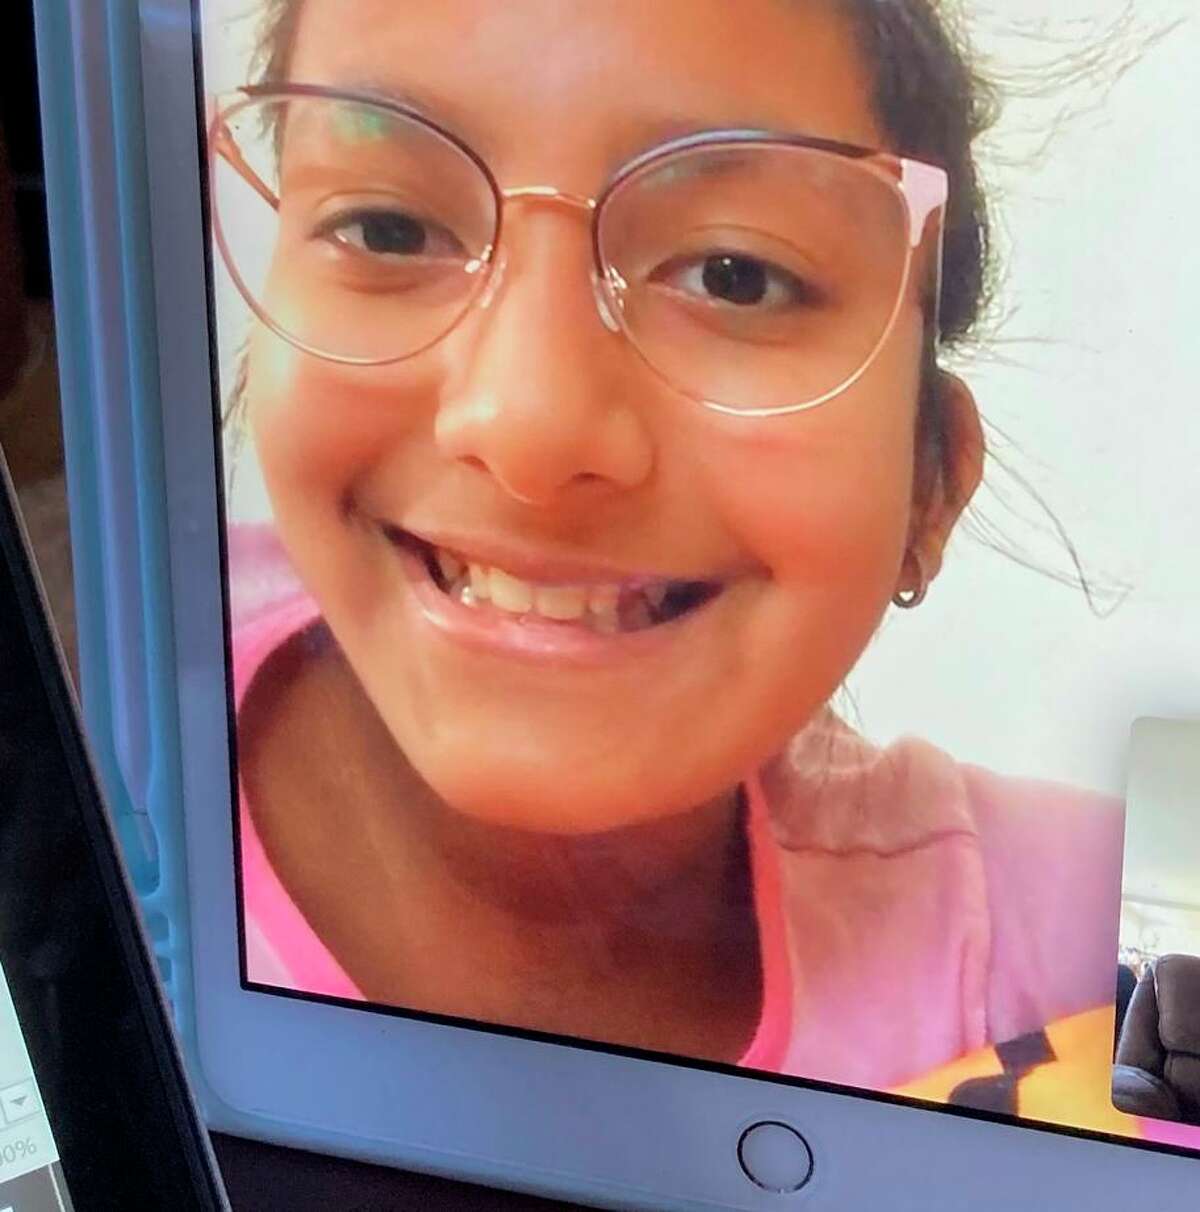 Krista Prasadi, 10, chats over FaceTime with her best friend, Shyne Staples.  Krista often provides a shoulder for her friend to lean on when Shyne is having painful symptoms of long COVID.